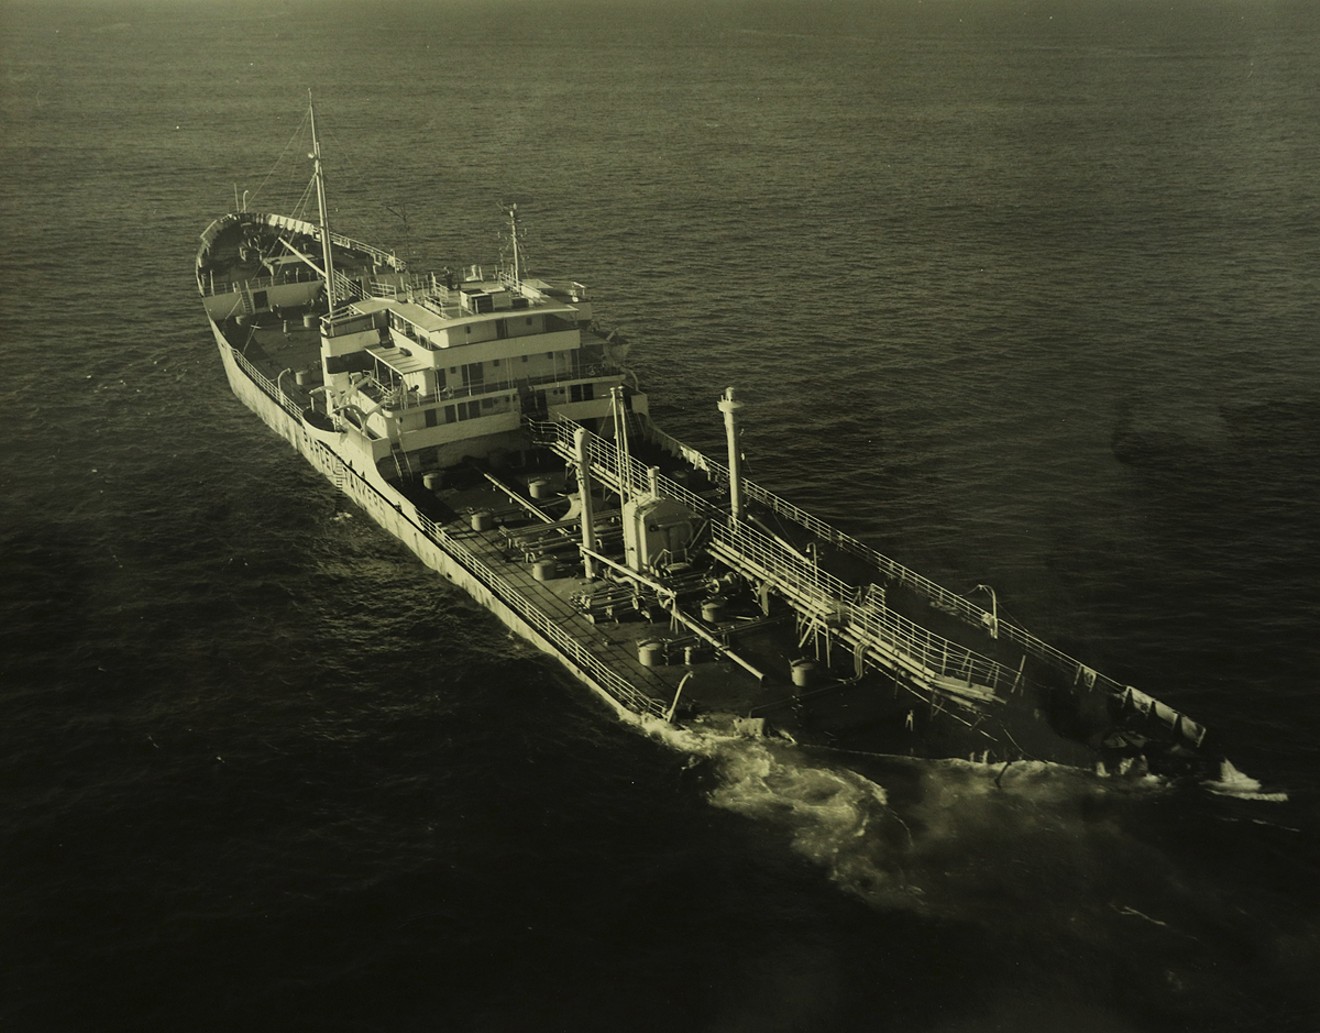 The aftermath of the collision shows the floating wreckage of the Stolt Dagali.